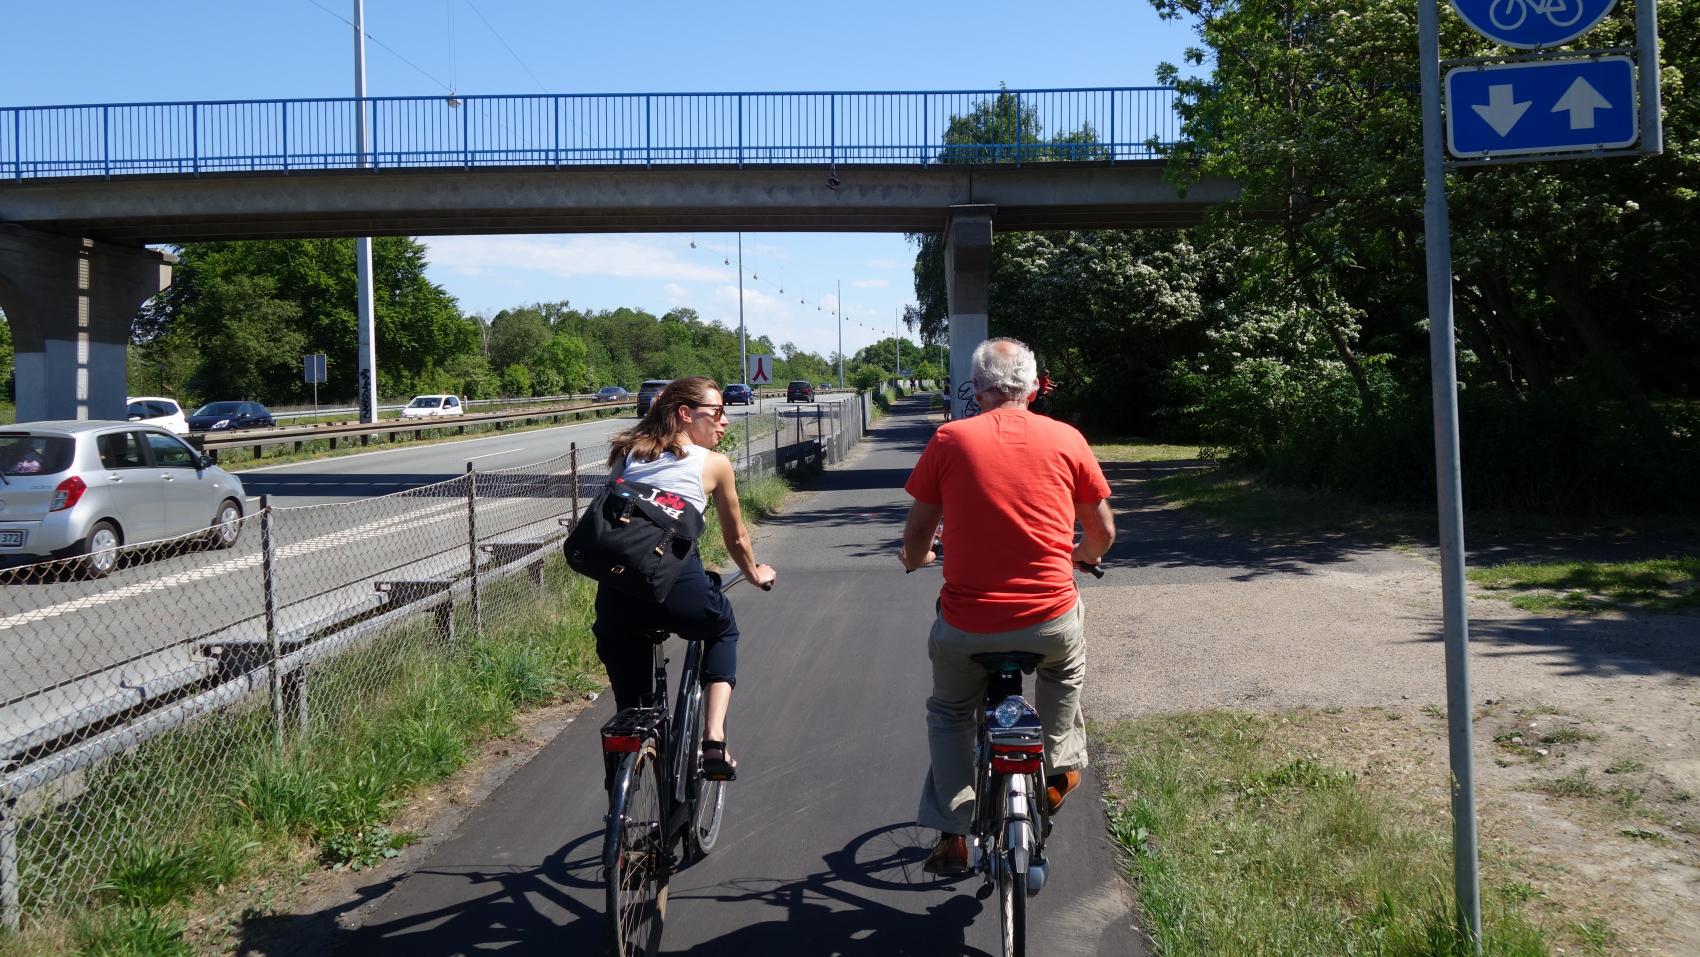 Bidirectional cycle paths are not very common in Denmark. But the options to cross to the other side of the motorway are limited and it would be unrealistic to expect cyclists to make detours that would be necessary in case of unidirectional cycle paths.